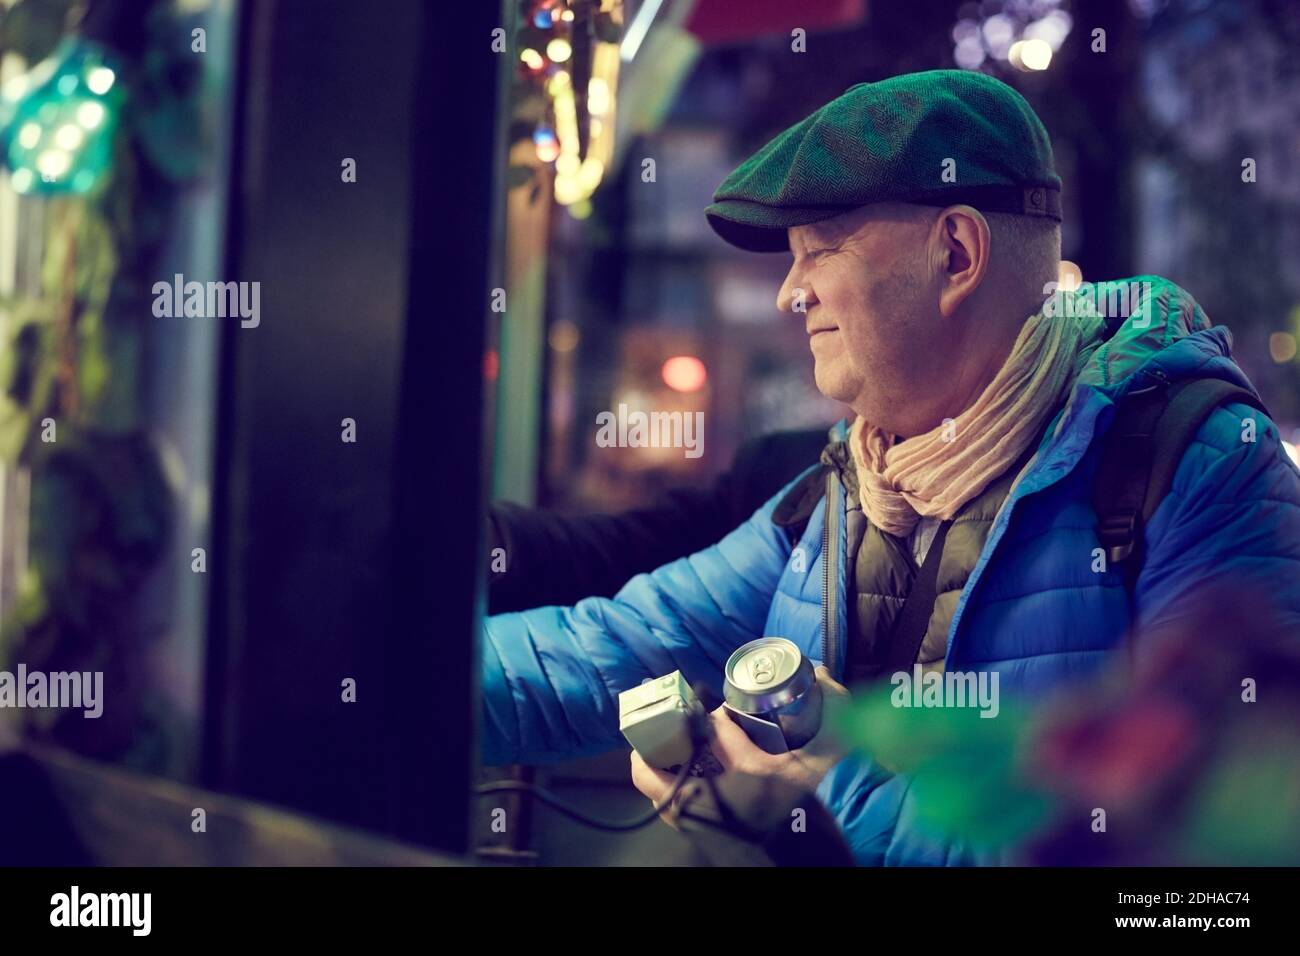 Smiling senior man holding drinks while standing at concession stand in city Stock Photo